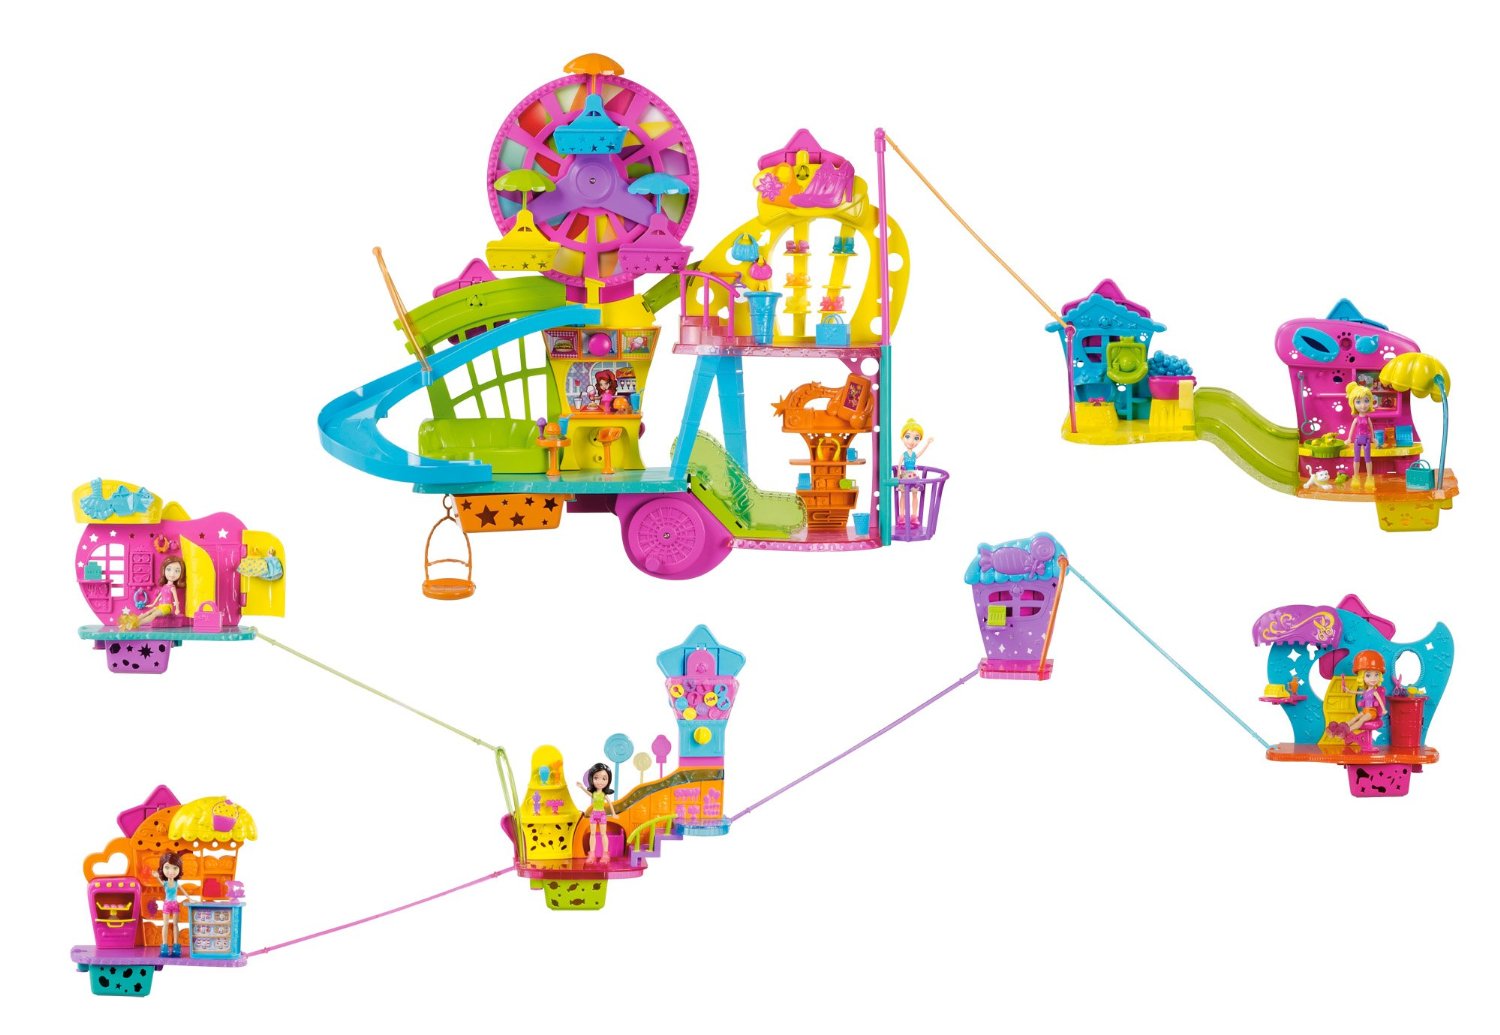 Polly Pocket Ultimate Wall Party Buildup Playset Only $27.27 – Reg $94.99